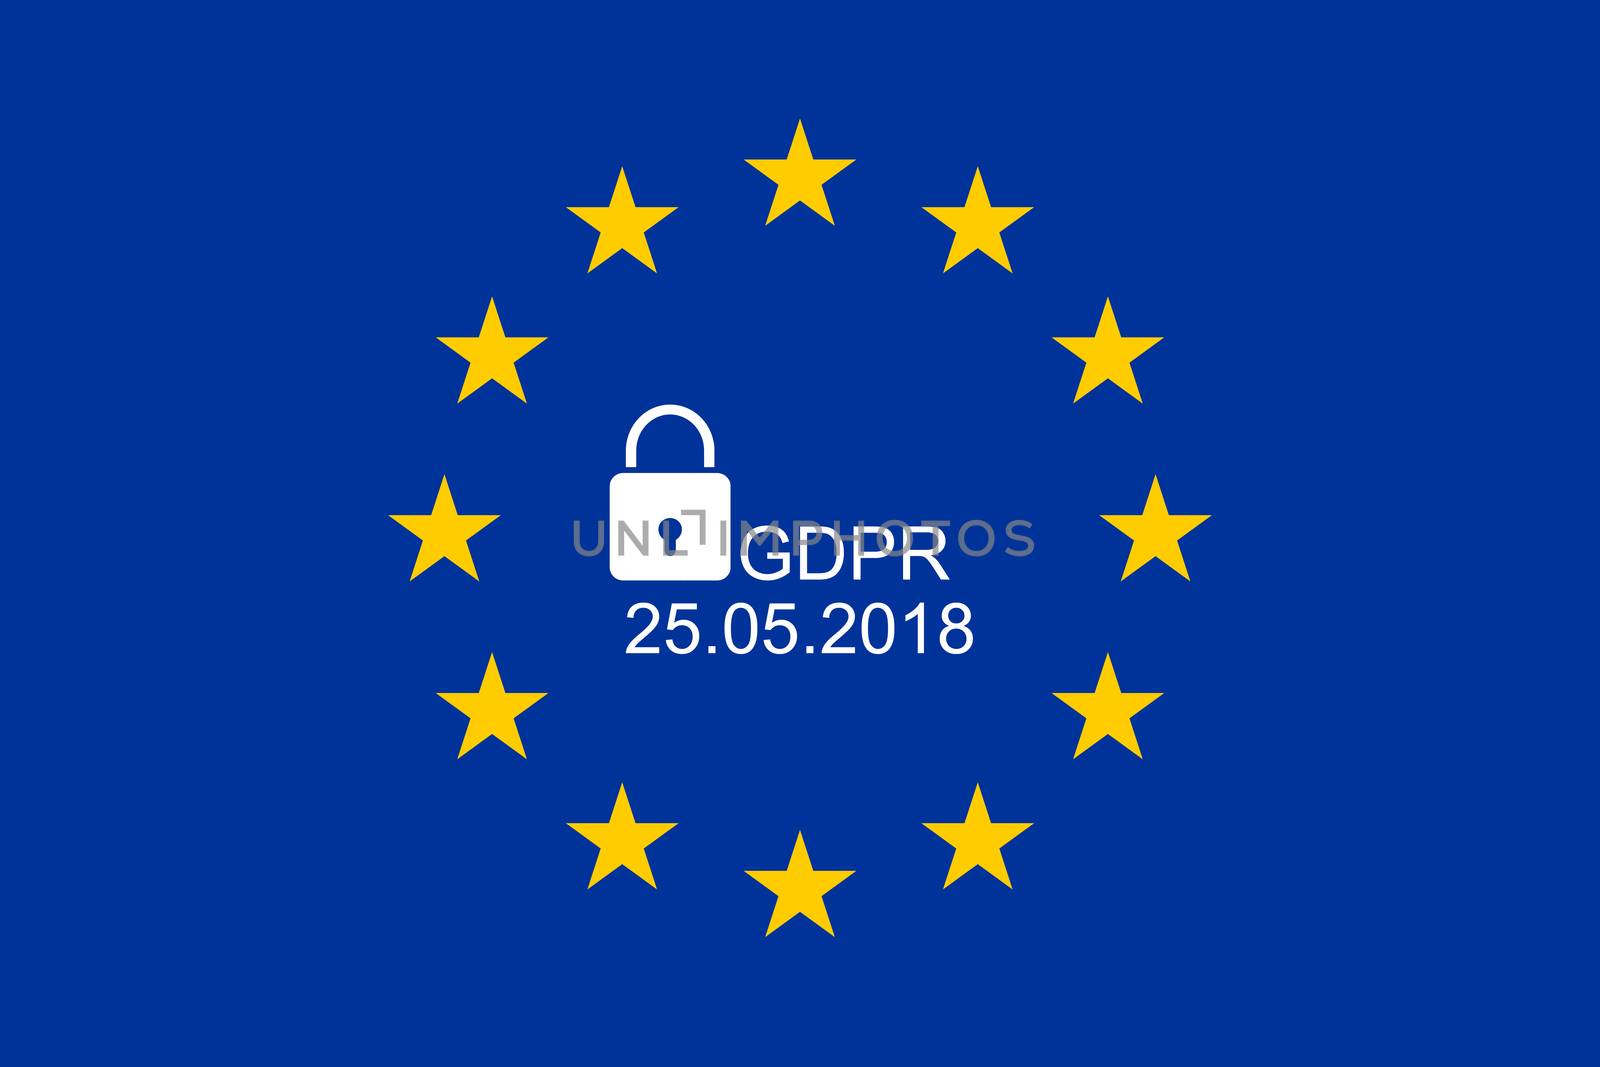 European flag with text GDPR and 25.05.2018